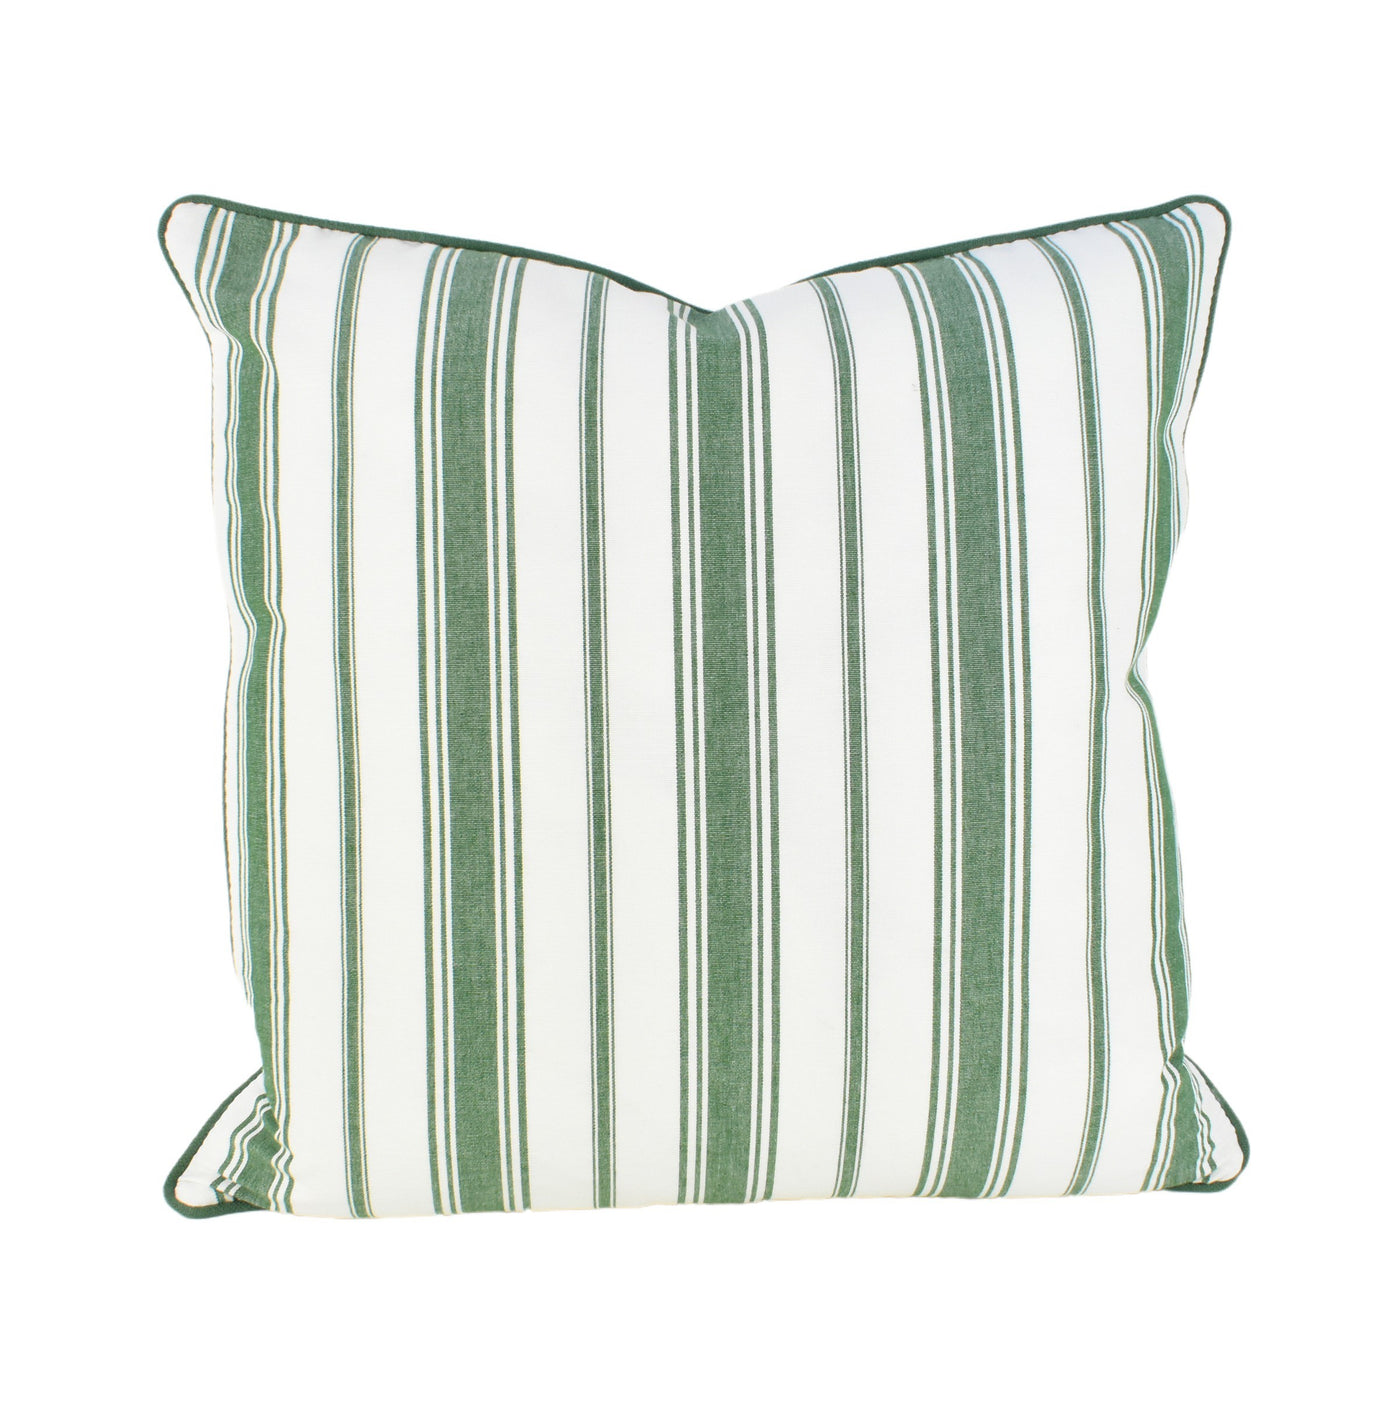 Front image of Allie Green Stripe Cushion with solid green piped edging